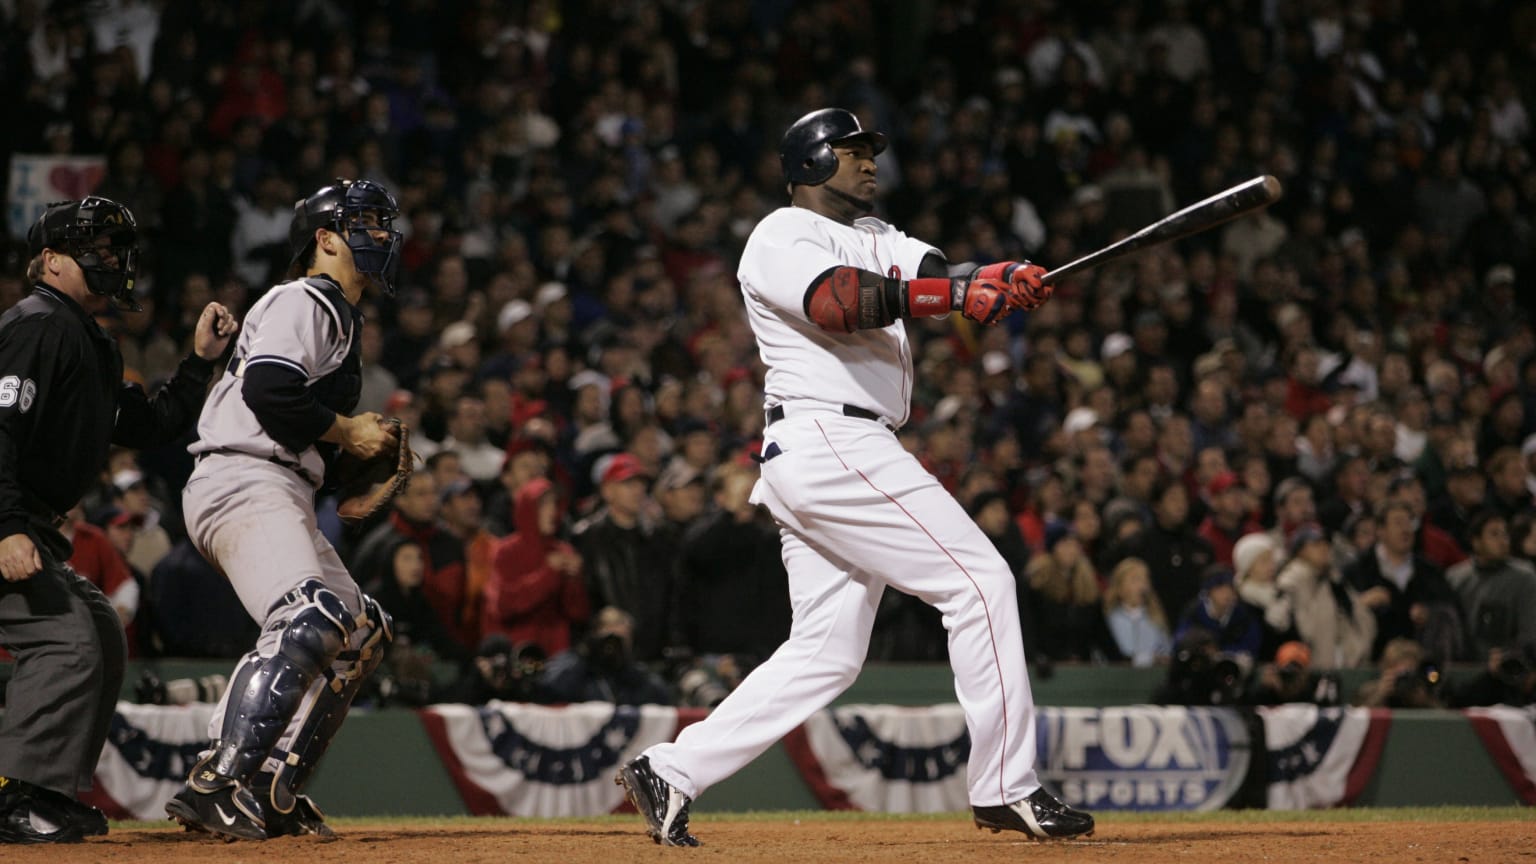 David Ortiz of the Red Sox watches a home run against the Yankees